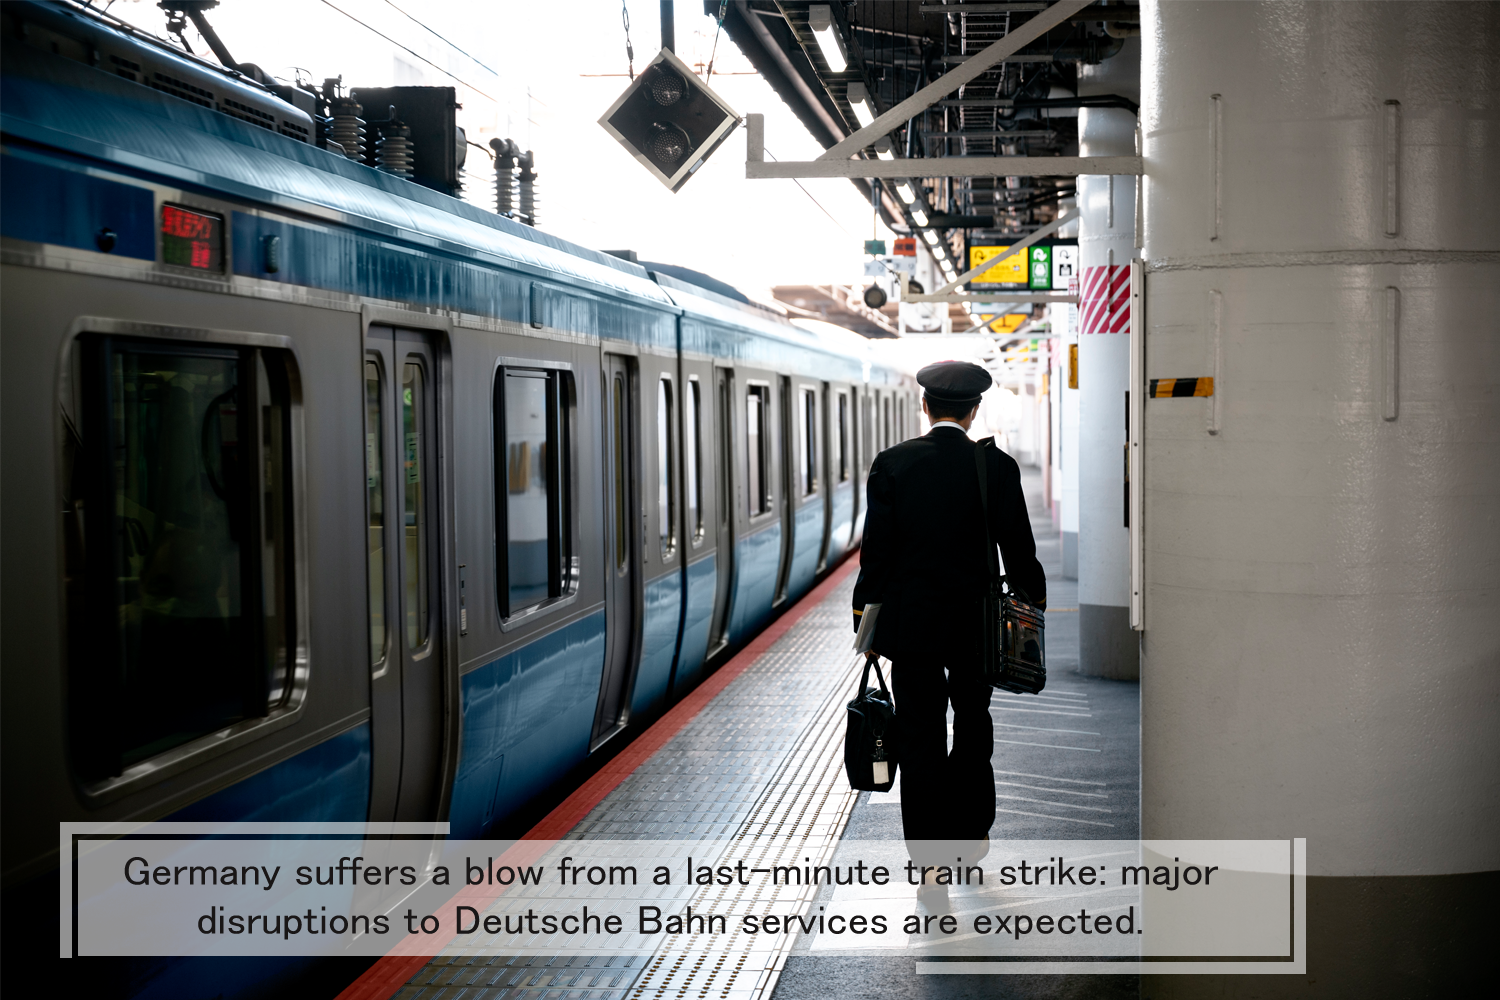 Germany suffers a blow from a last-minute train strike: major disruptions to Deutsche Bahn services are expected